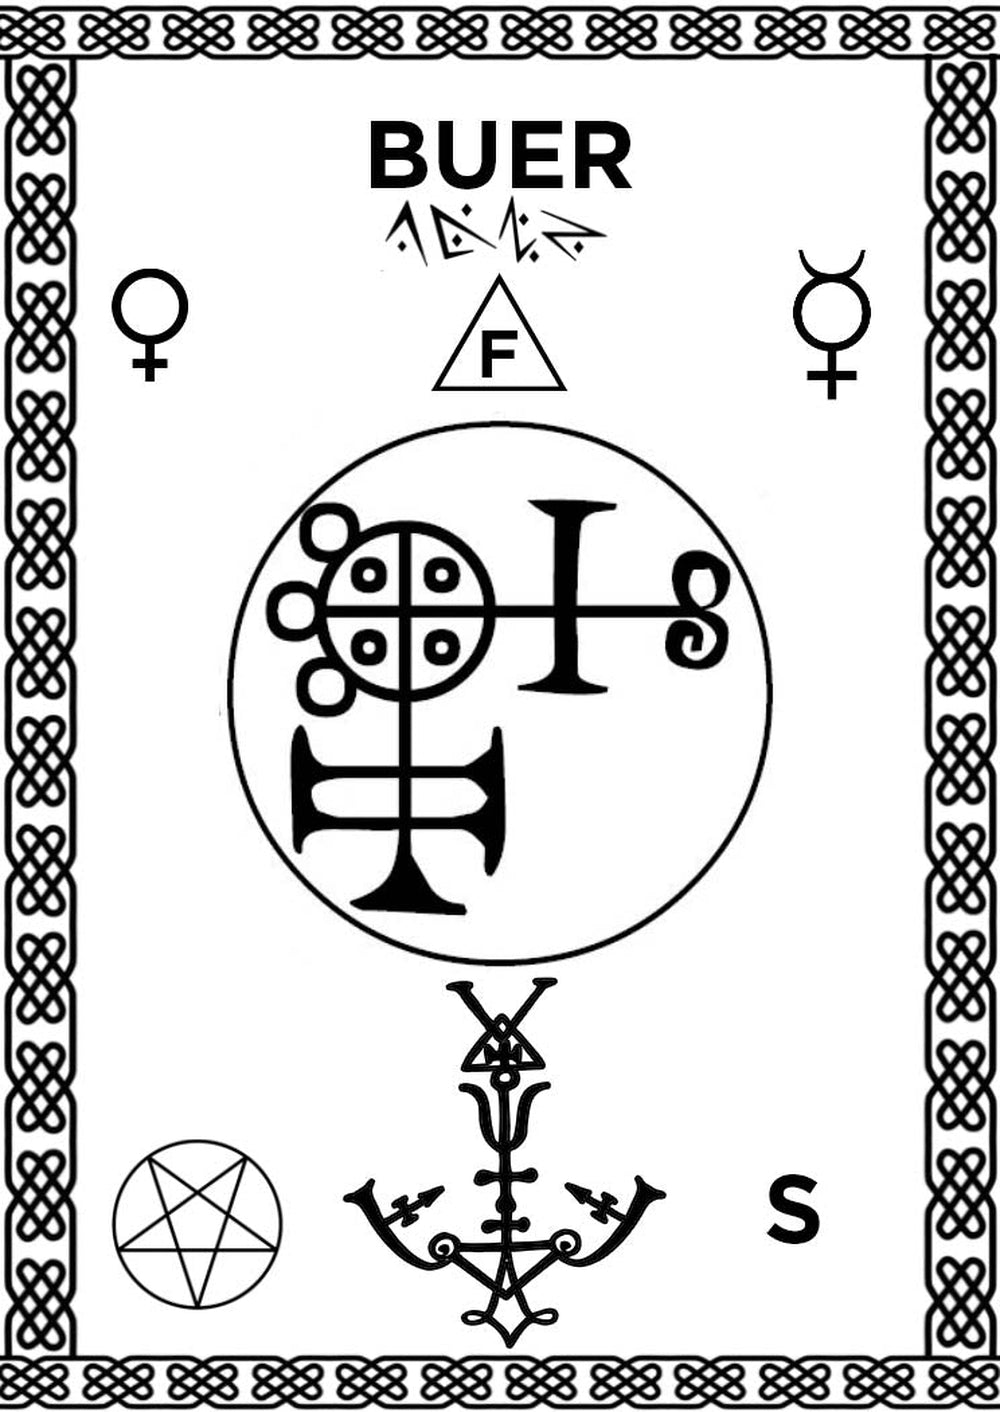 Invocation-Alignment Pad-with-the-Sigil-of-Buer-for-home-oltar-Witchcraft-2